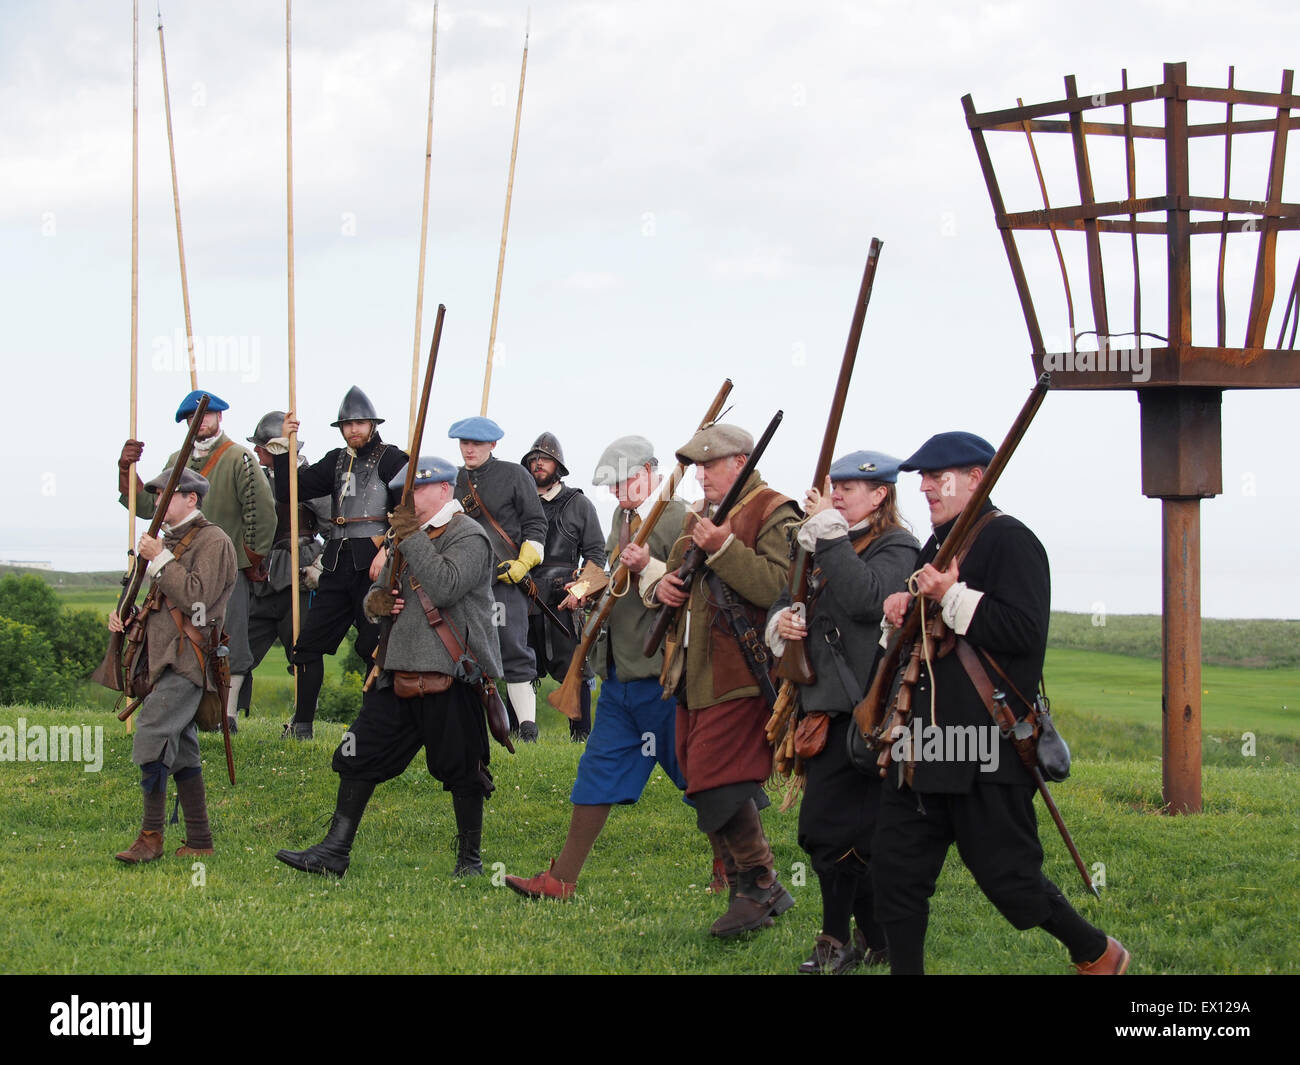 A group of participants in a re-enactment of the occupation of Berwick-upon-Tweed by Scottish forces during the 17th Century. Stock Photo